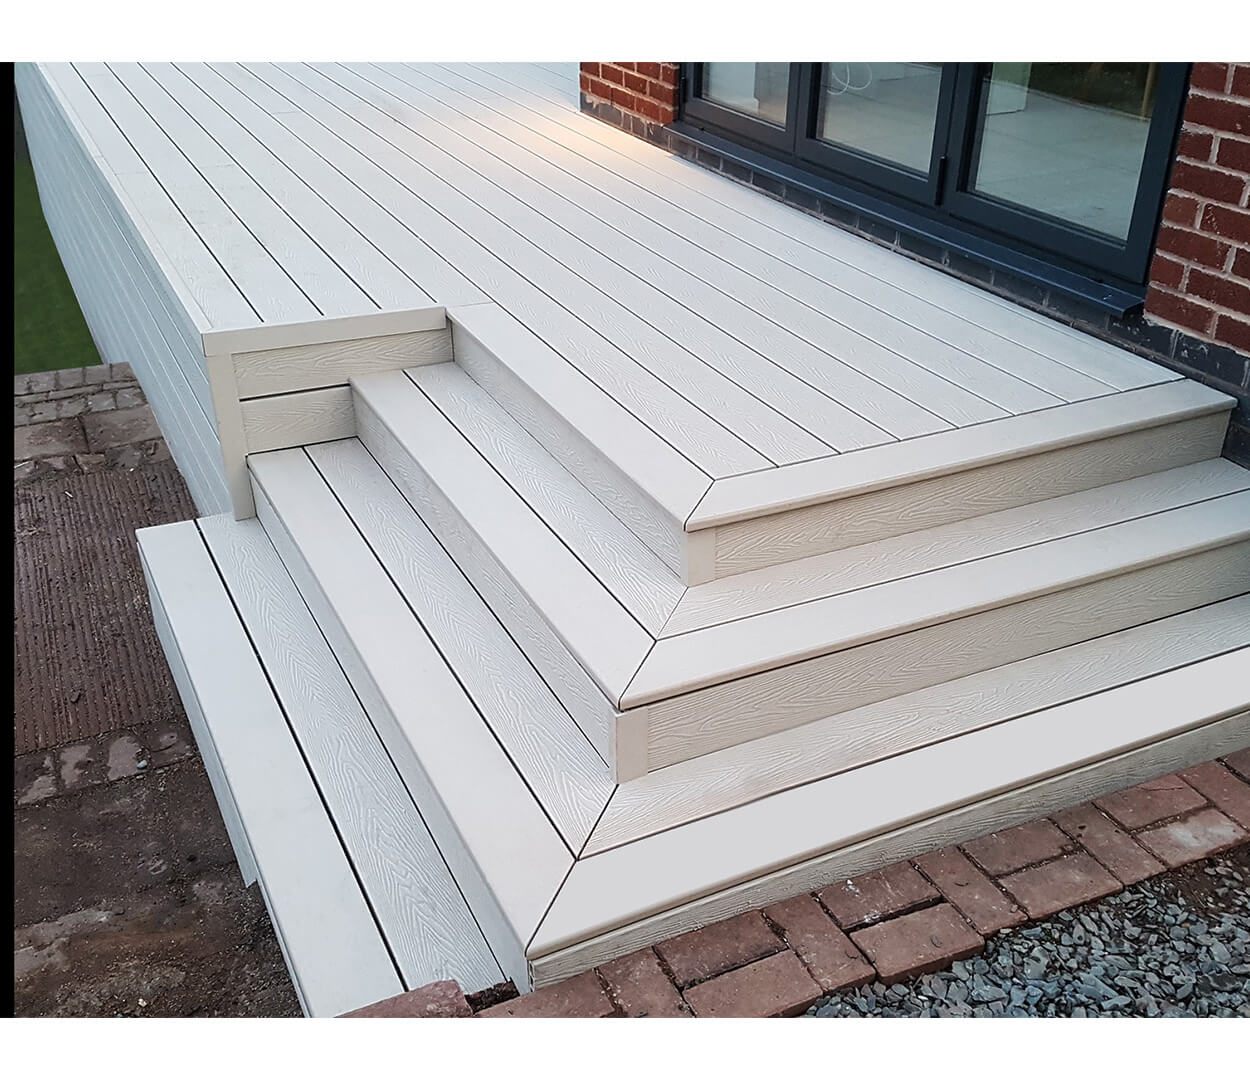 Raised ivory woodgrain decking area with a bullnose edge.